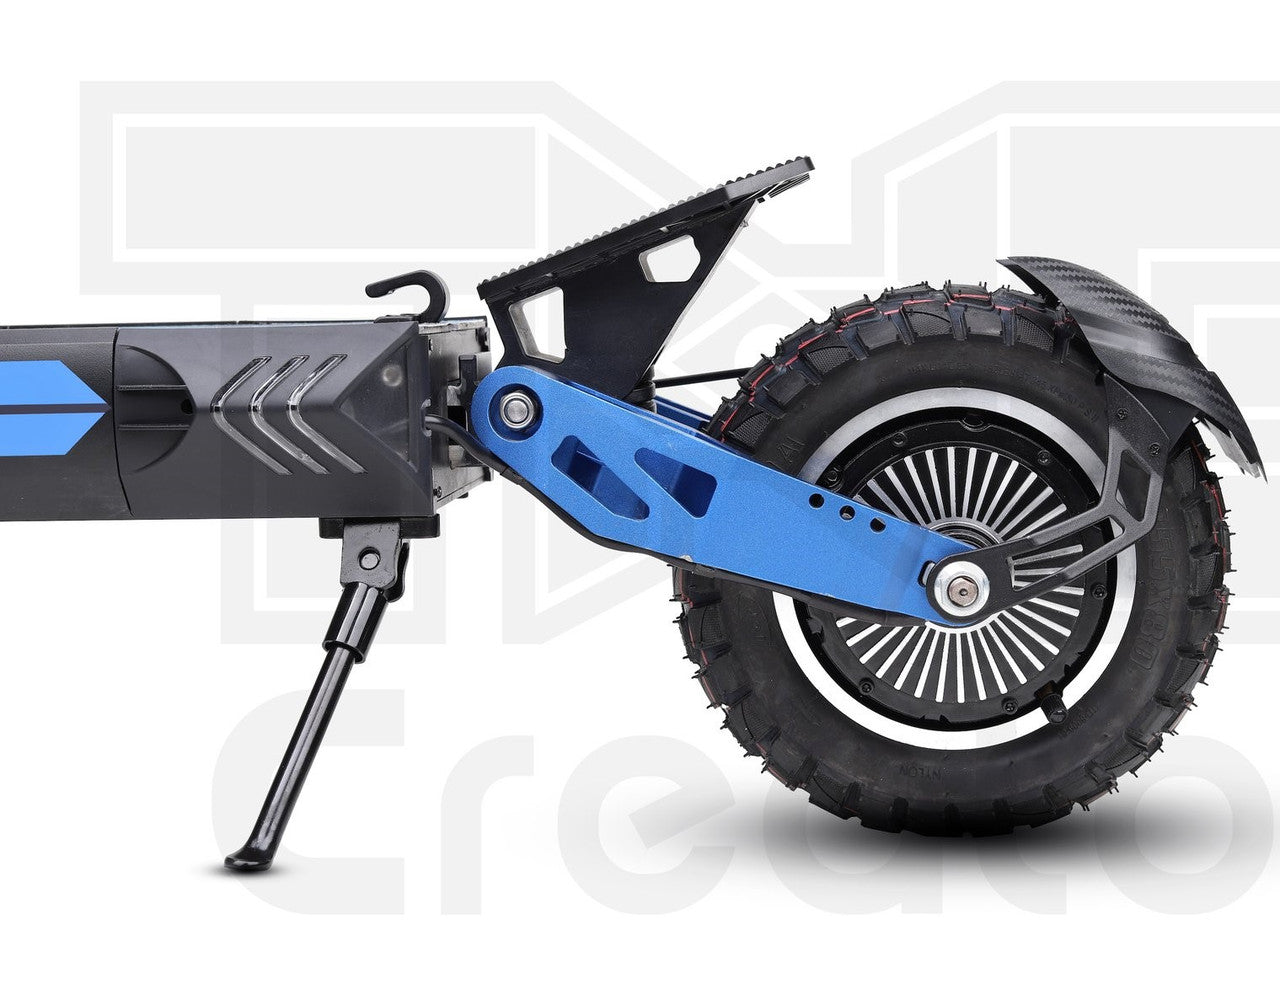 NEW! 202 3 T-2000 V60 2400w 60v Lithium 21ah Electric Scooter (Blue)